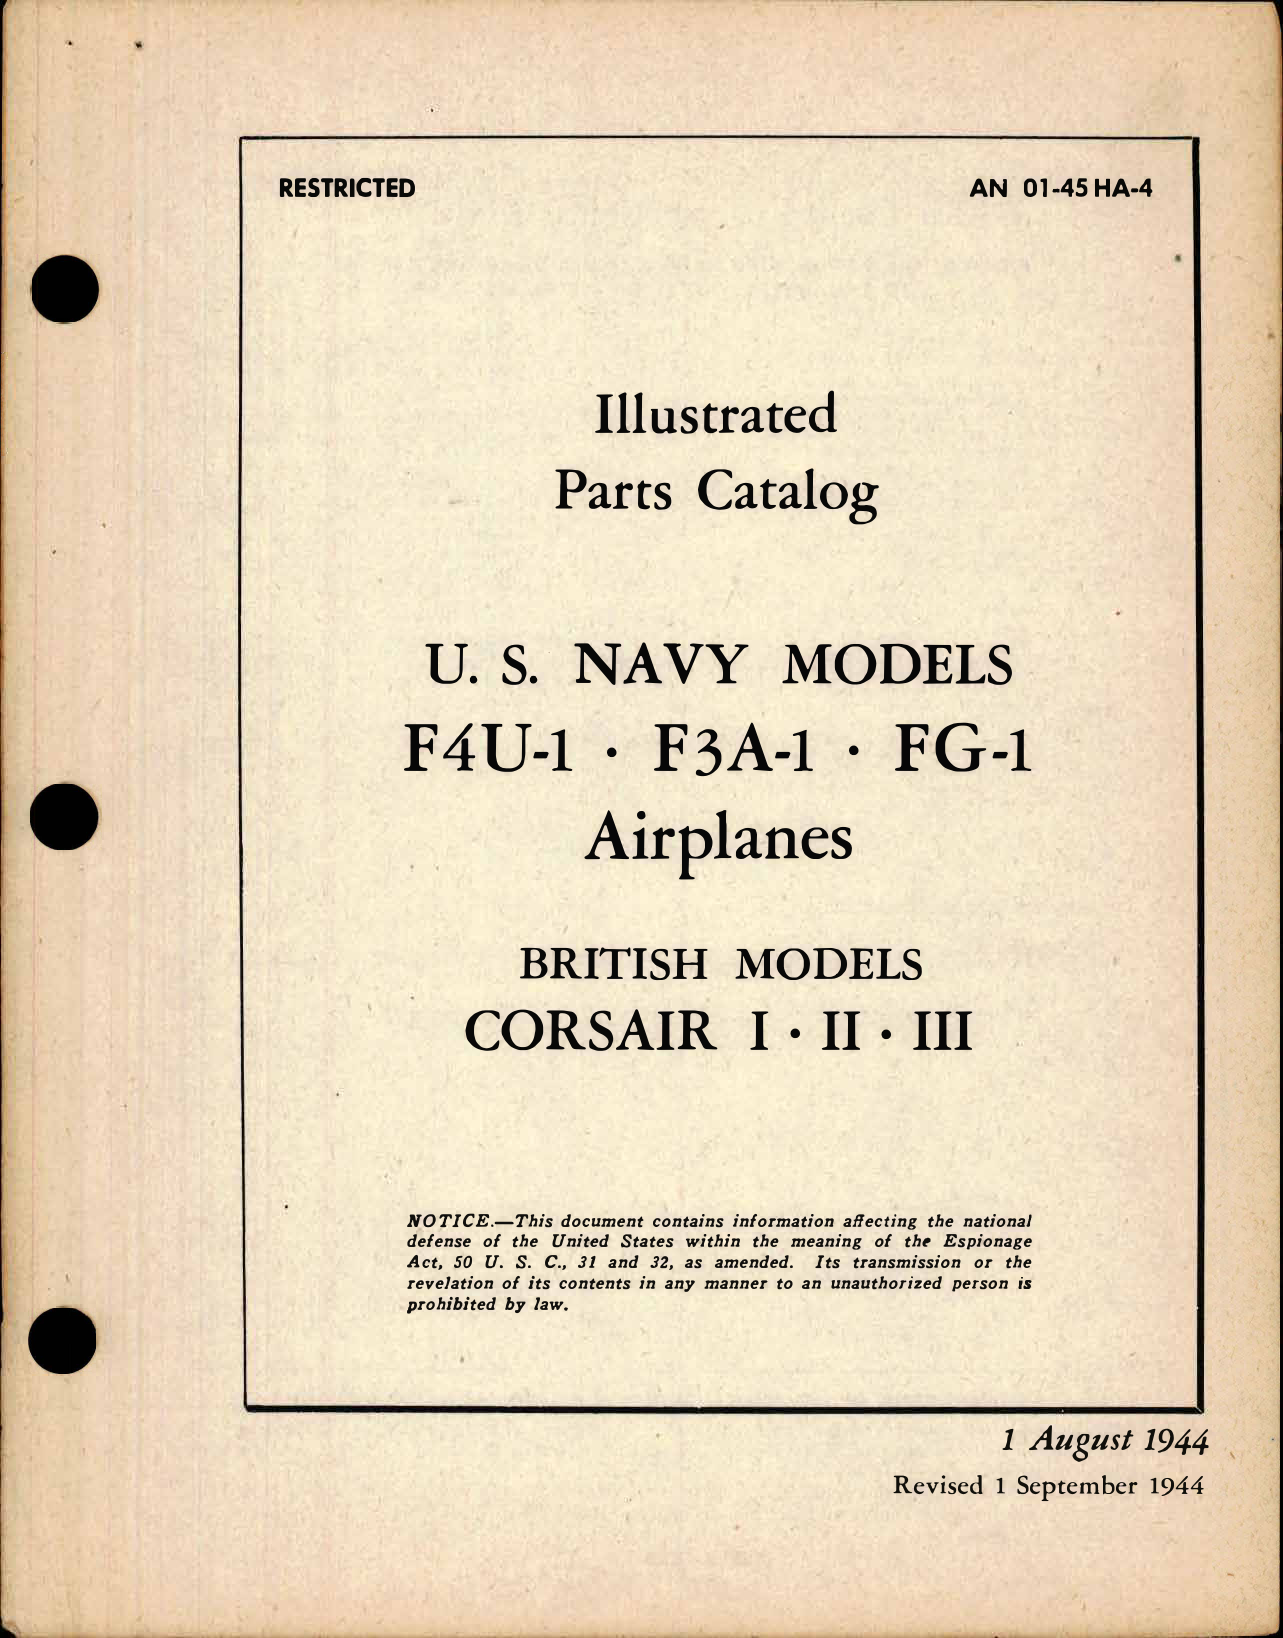 Sample page 1 from AirCorps Library document: Parts Catalog for Navy Models F4U-1, F3A-1, FG-1, and British Models Corsair I - II - III